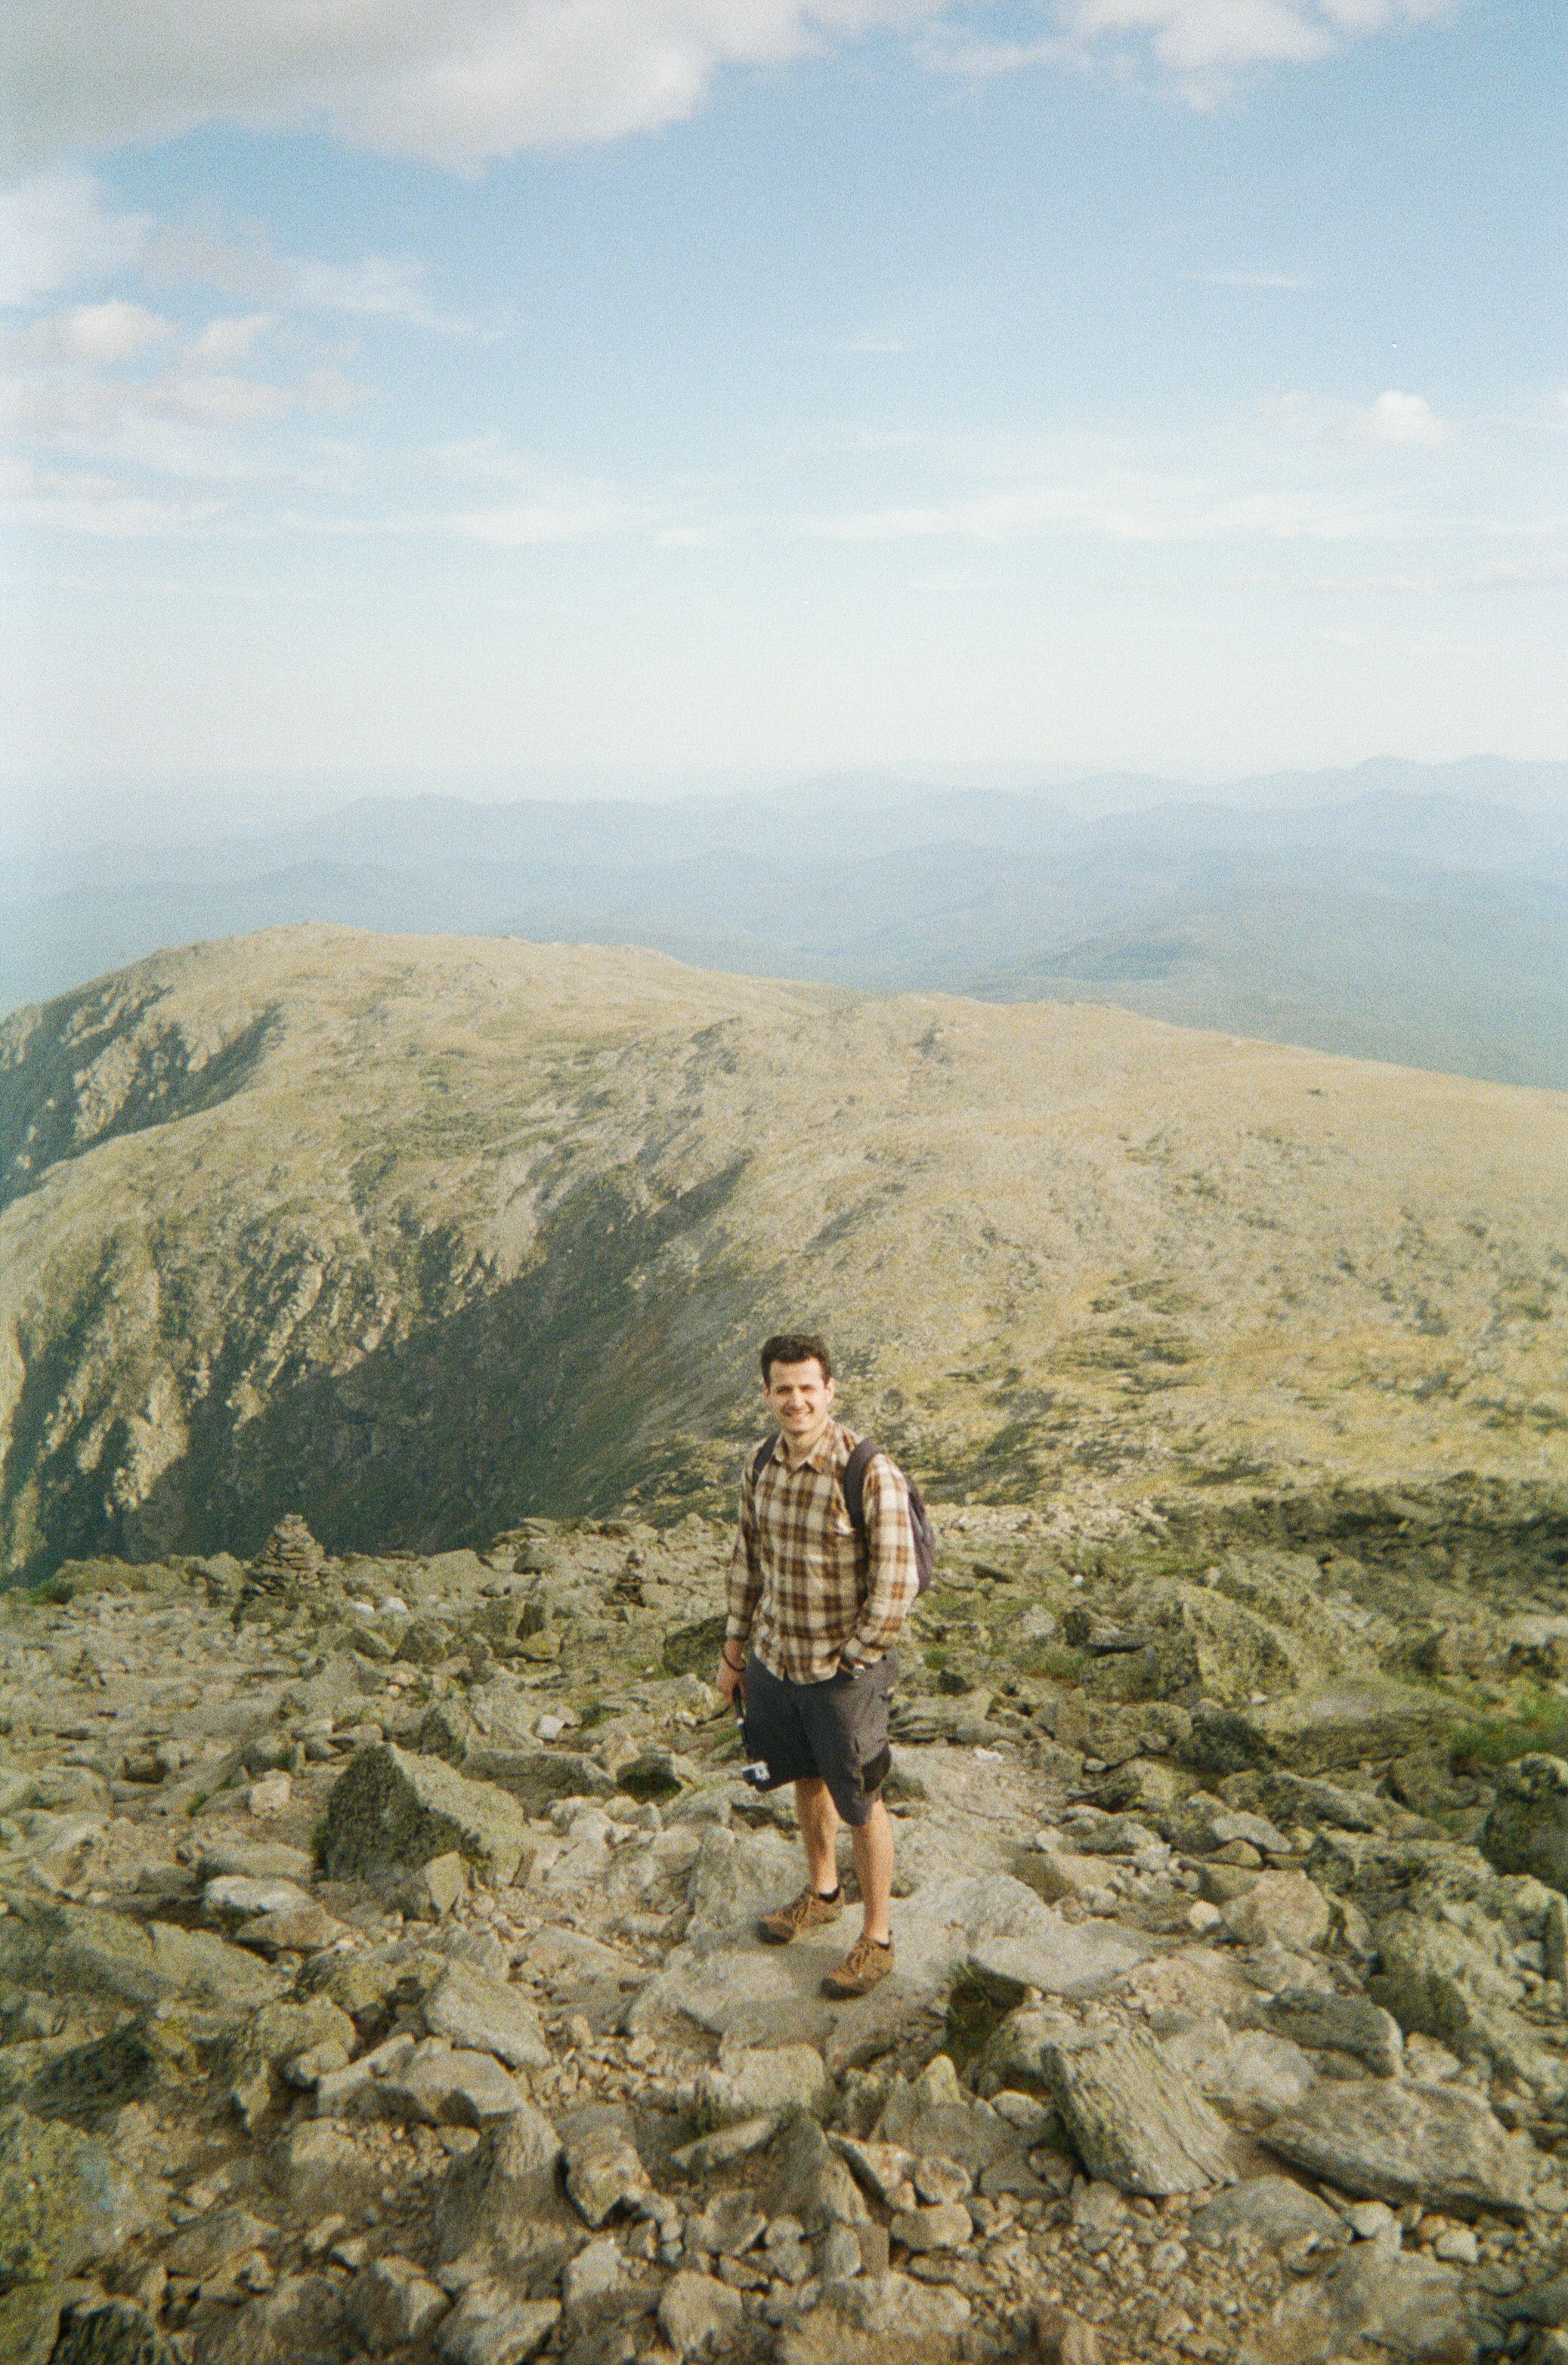 man in brown and black plaid shirt standing on rocky mountain during daytime